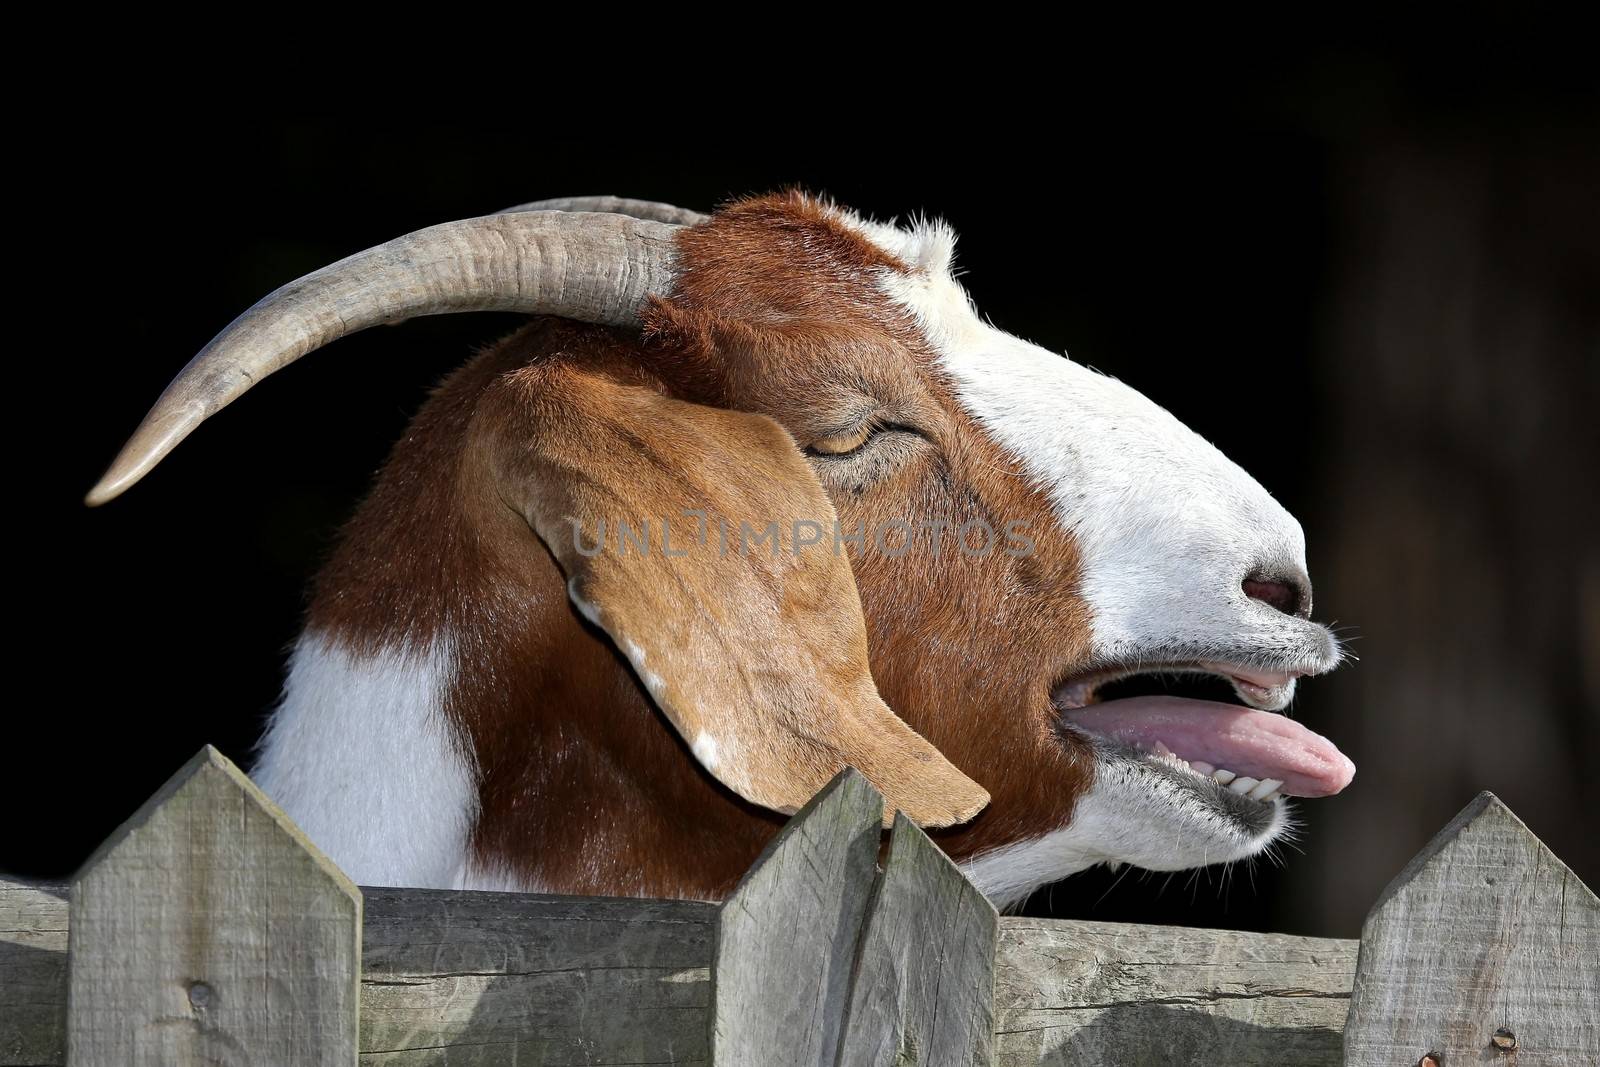 Male billy goat bleating with it;s mouth open and looking over fence